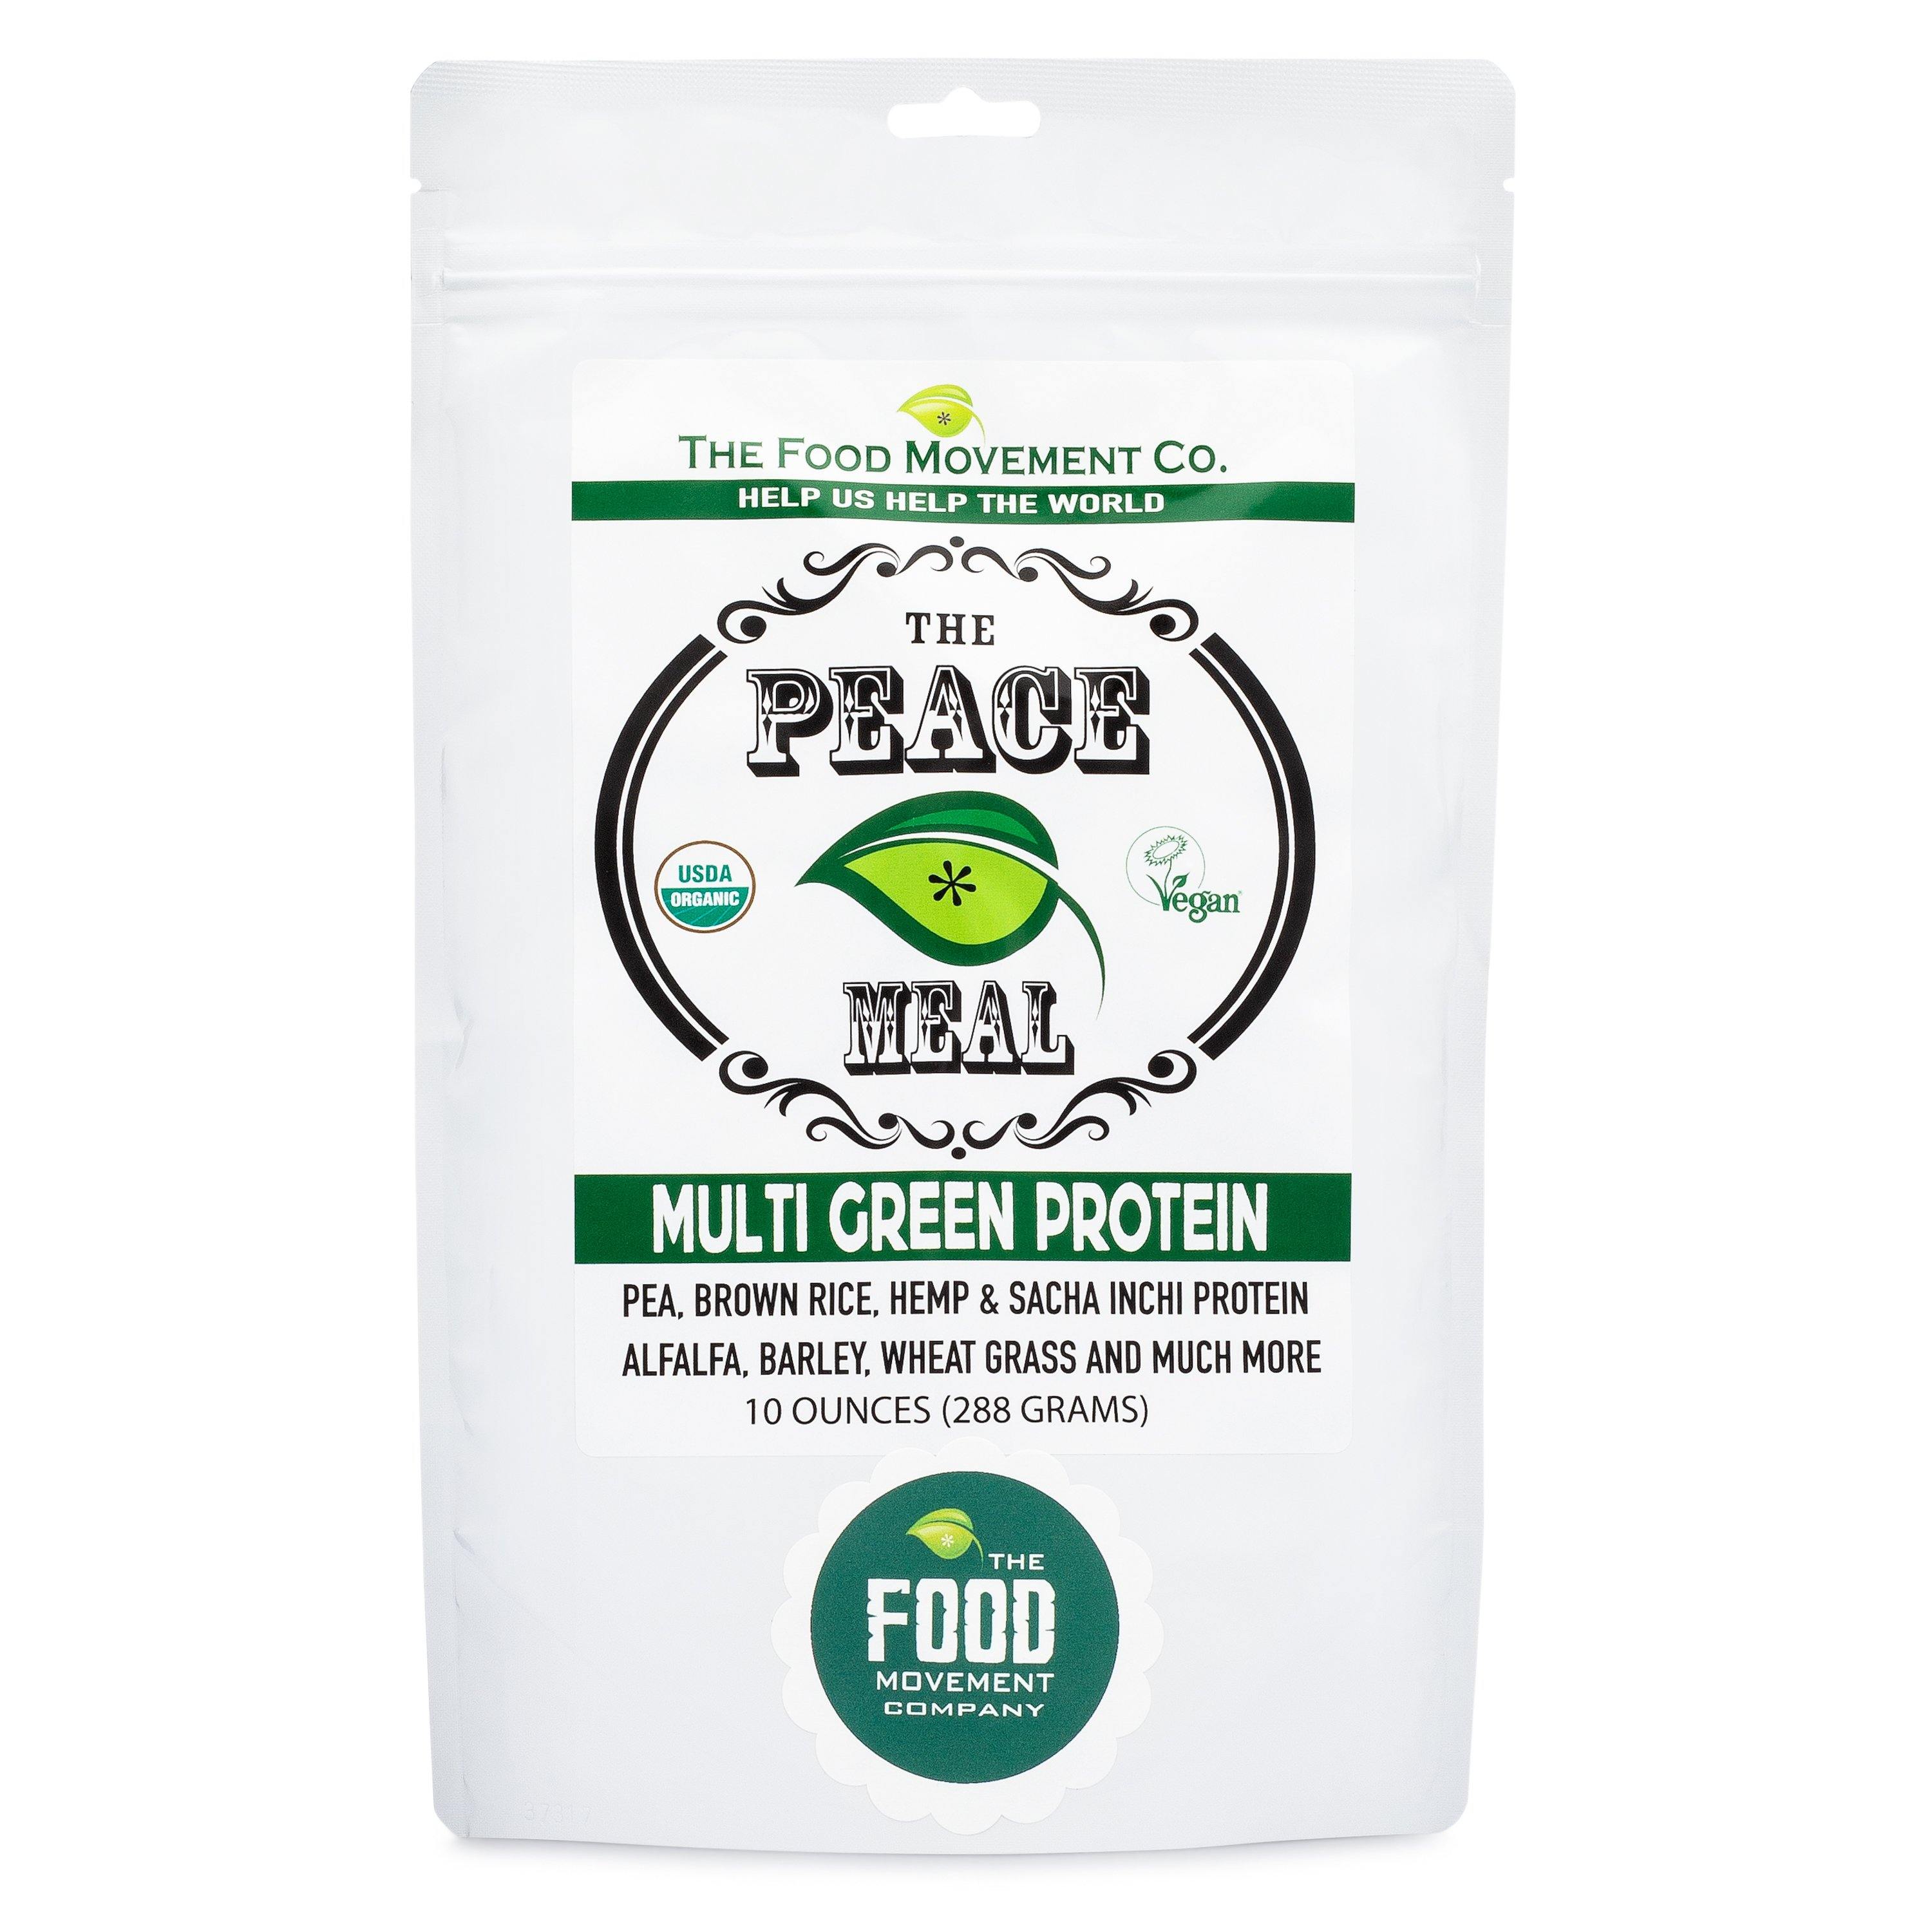 The Food Movement - THE PEACE MEAL - Multi Green Protein -10 oz. - Highland Health Foods